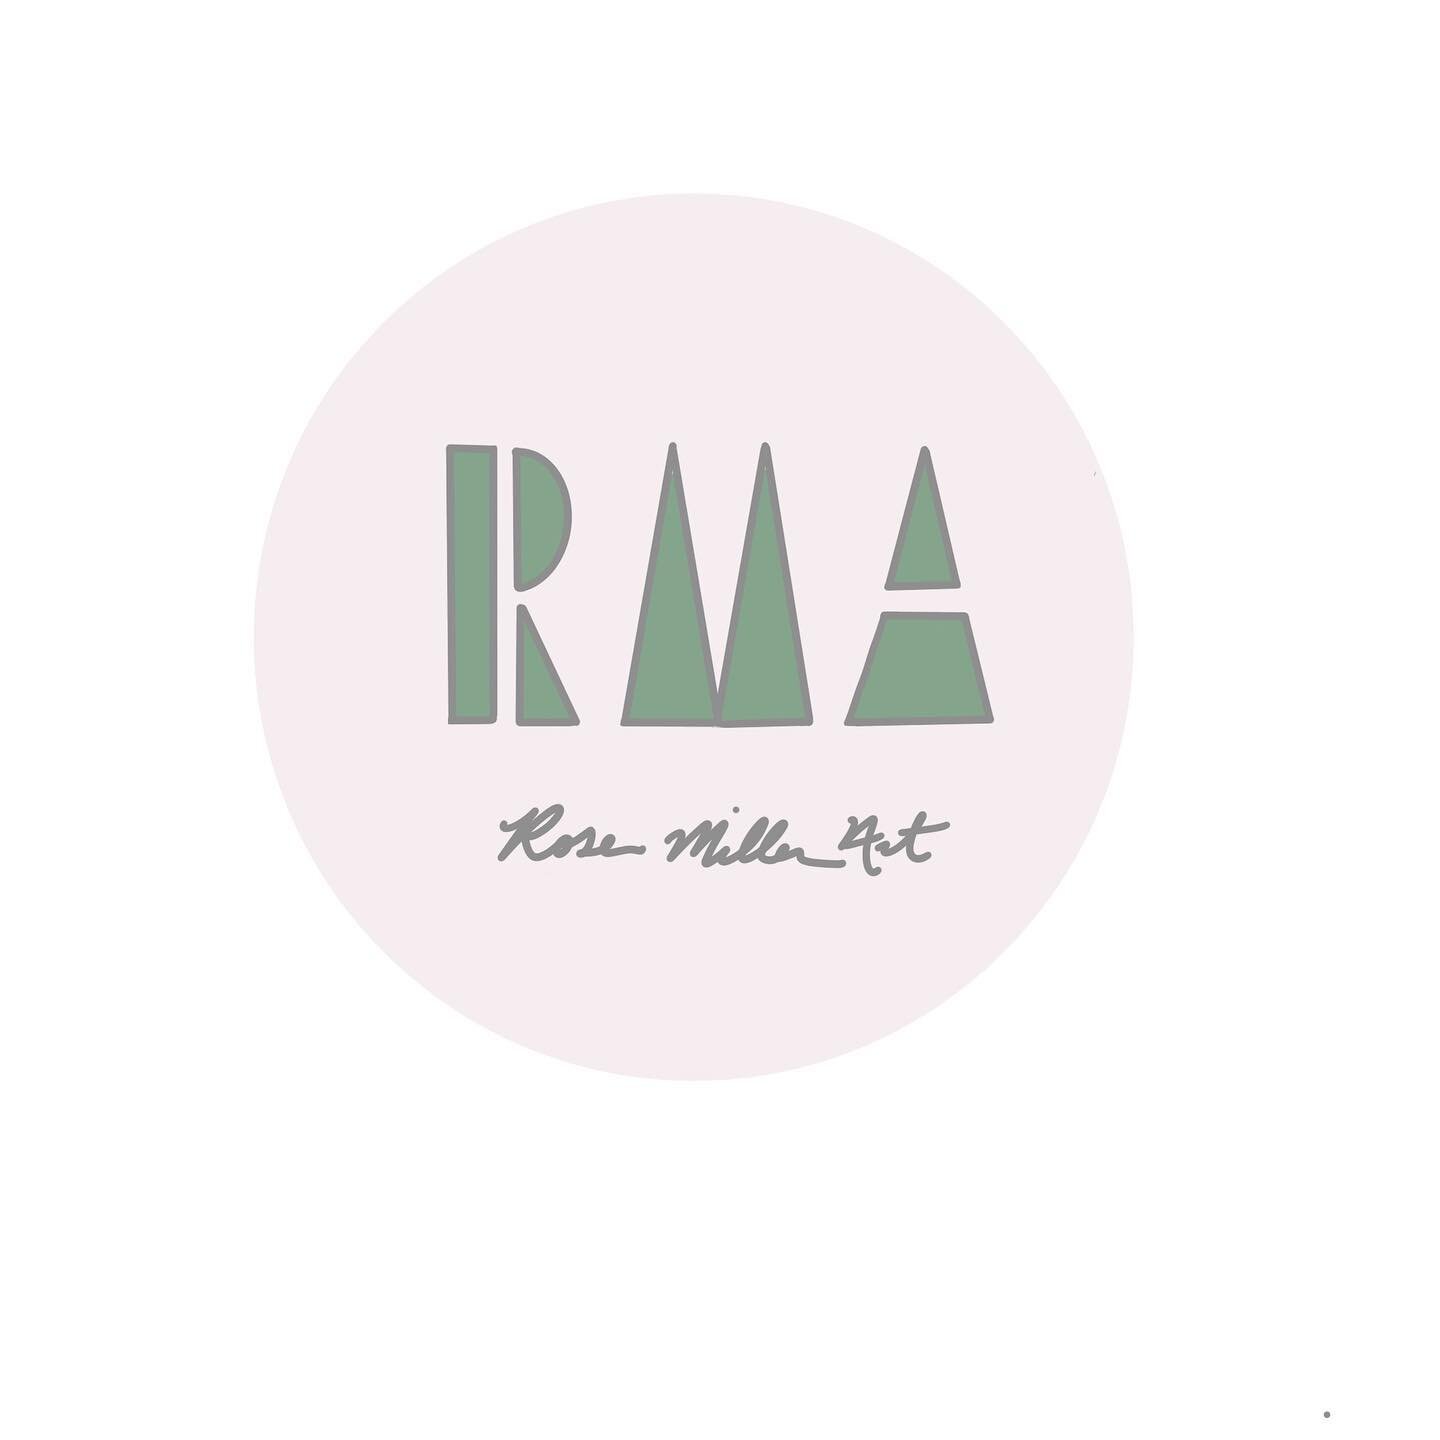 I&rsquo;ve always wanted a logo, but felt it wasn&rsquo;t necessary. Maybe it still isn&rsquo;t needed but as I dabble in creating stationary sets for my art biz, it makes it all come together somehow and &hellip;I legit like it!
My main concern with